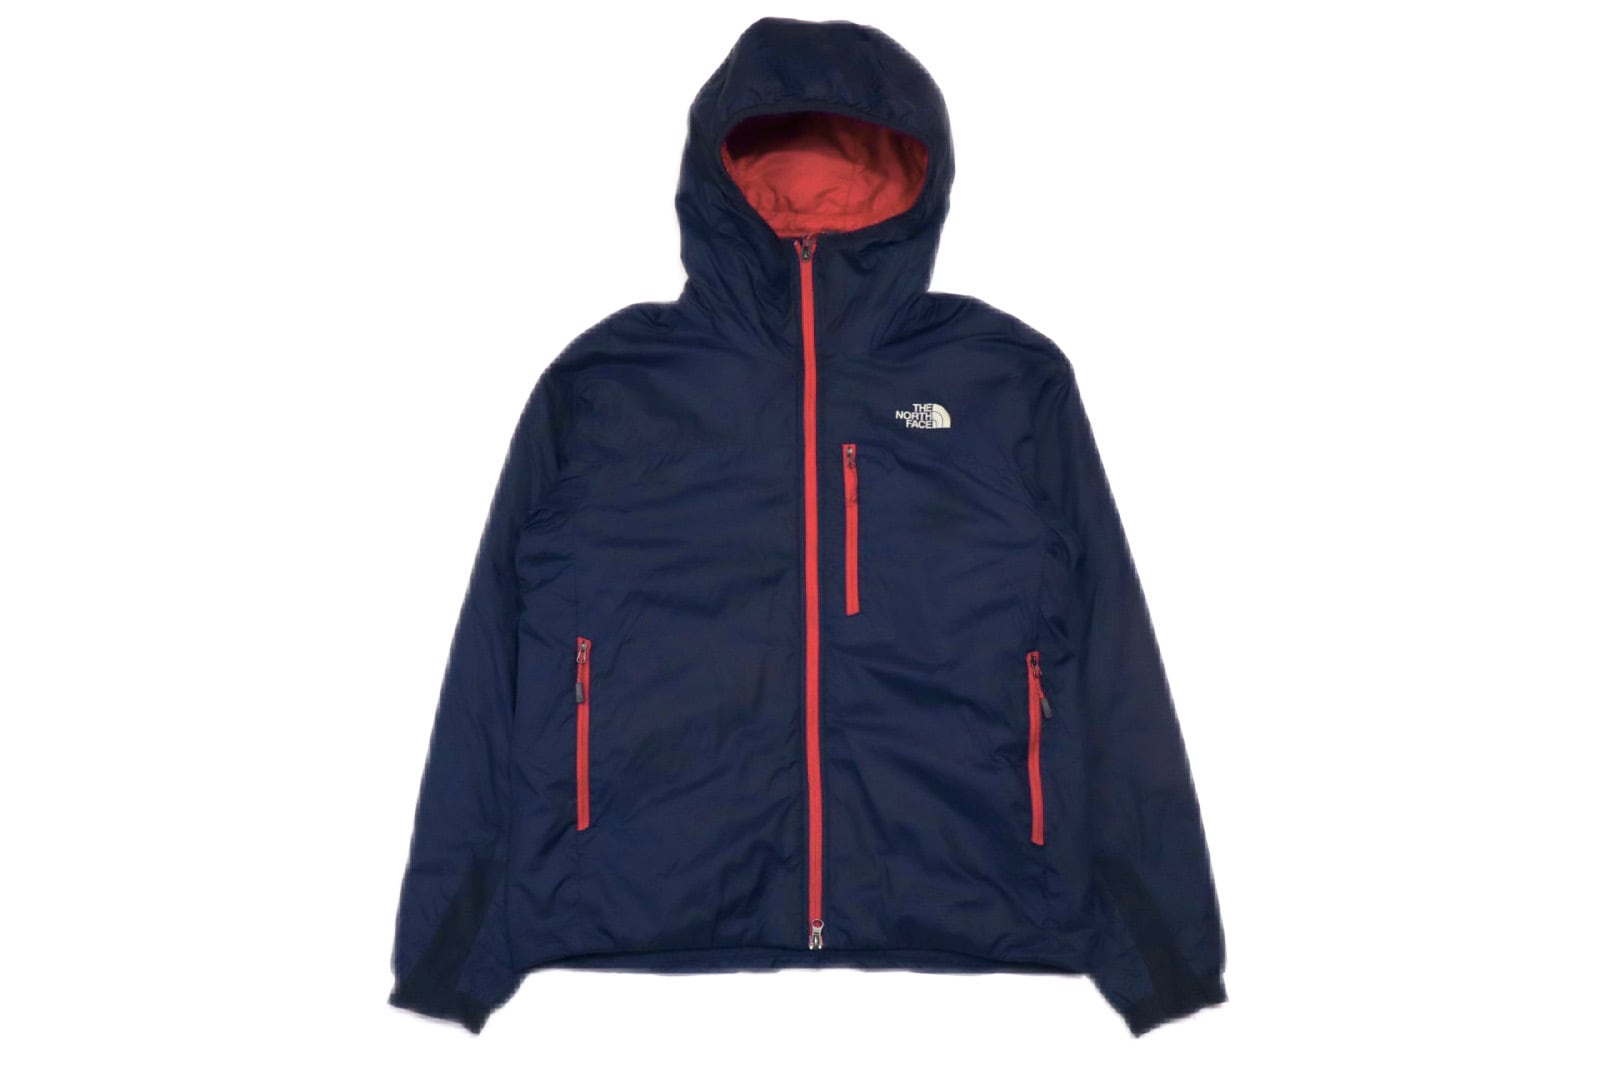 USED THE NORTH FACE ”SUMMIT SERIES” PRIMALOFT Hooded Jacket -Medium 01782 |  LODGE heavy&duty outdoor equipment store